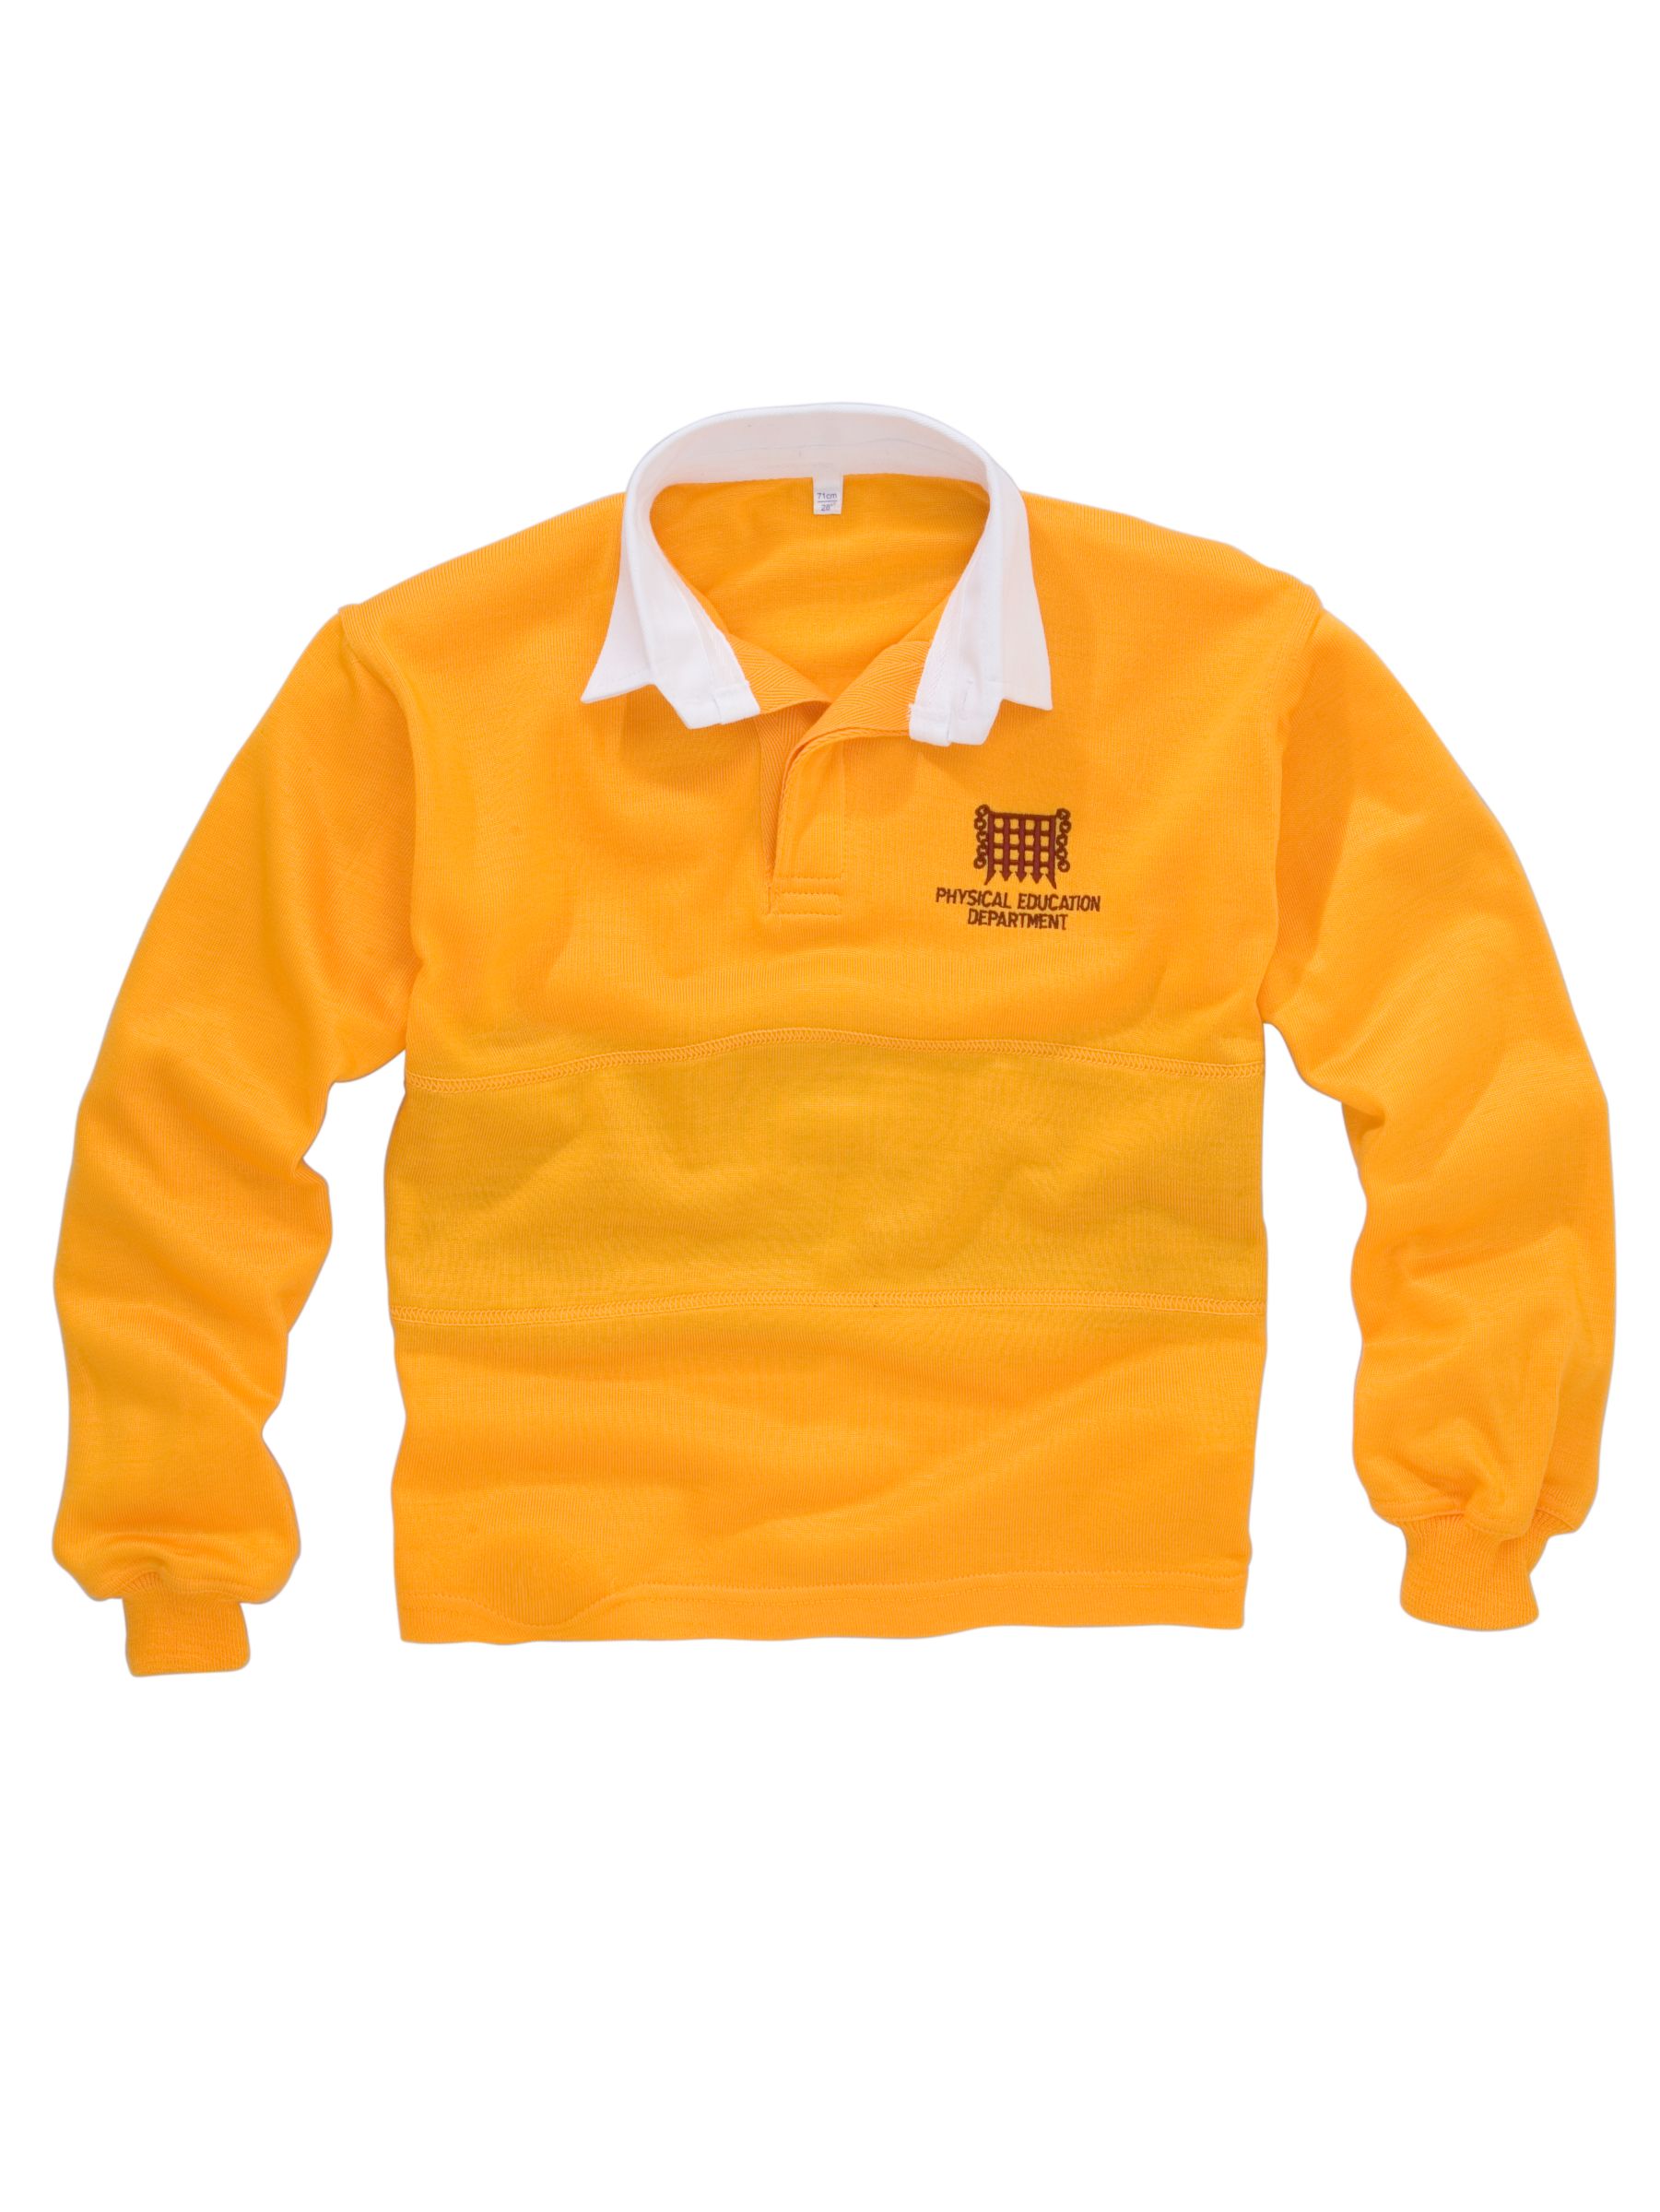 Unisex Rugby Shirt, Amber